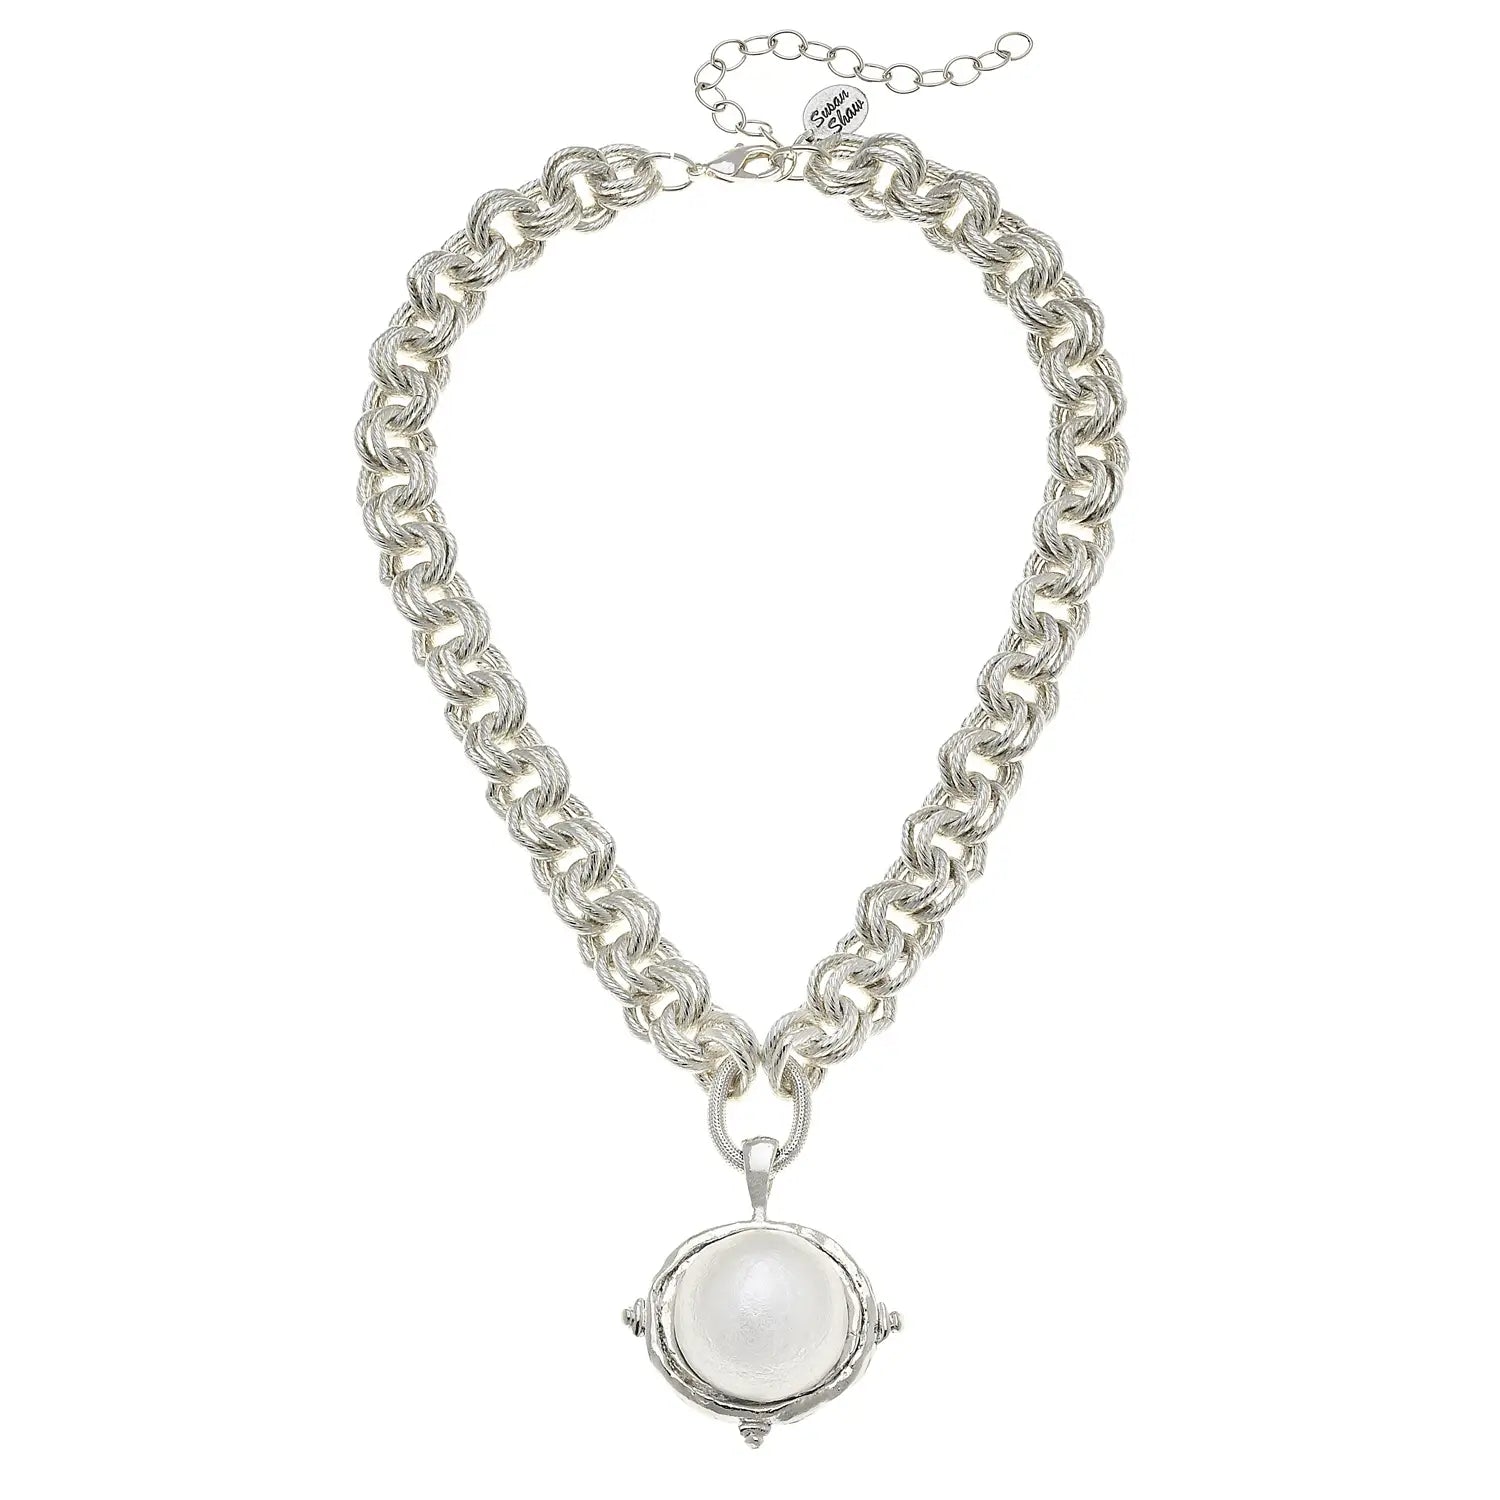 Silver Necklace Extender Chain - Susan Shaw